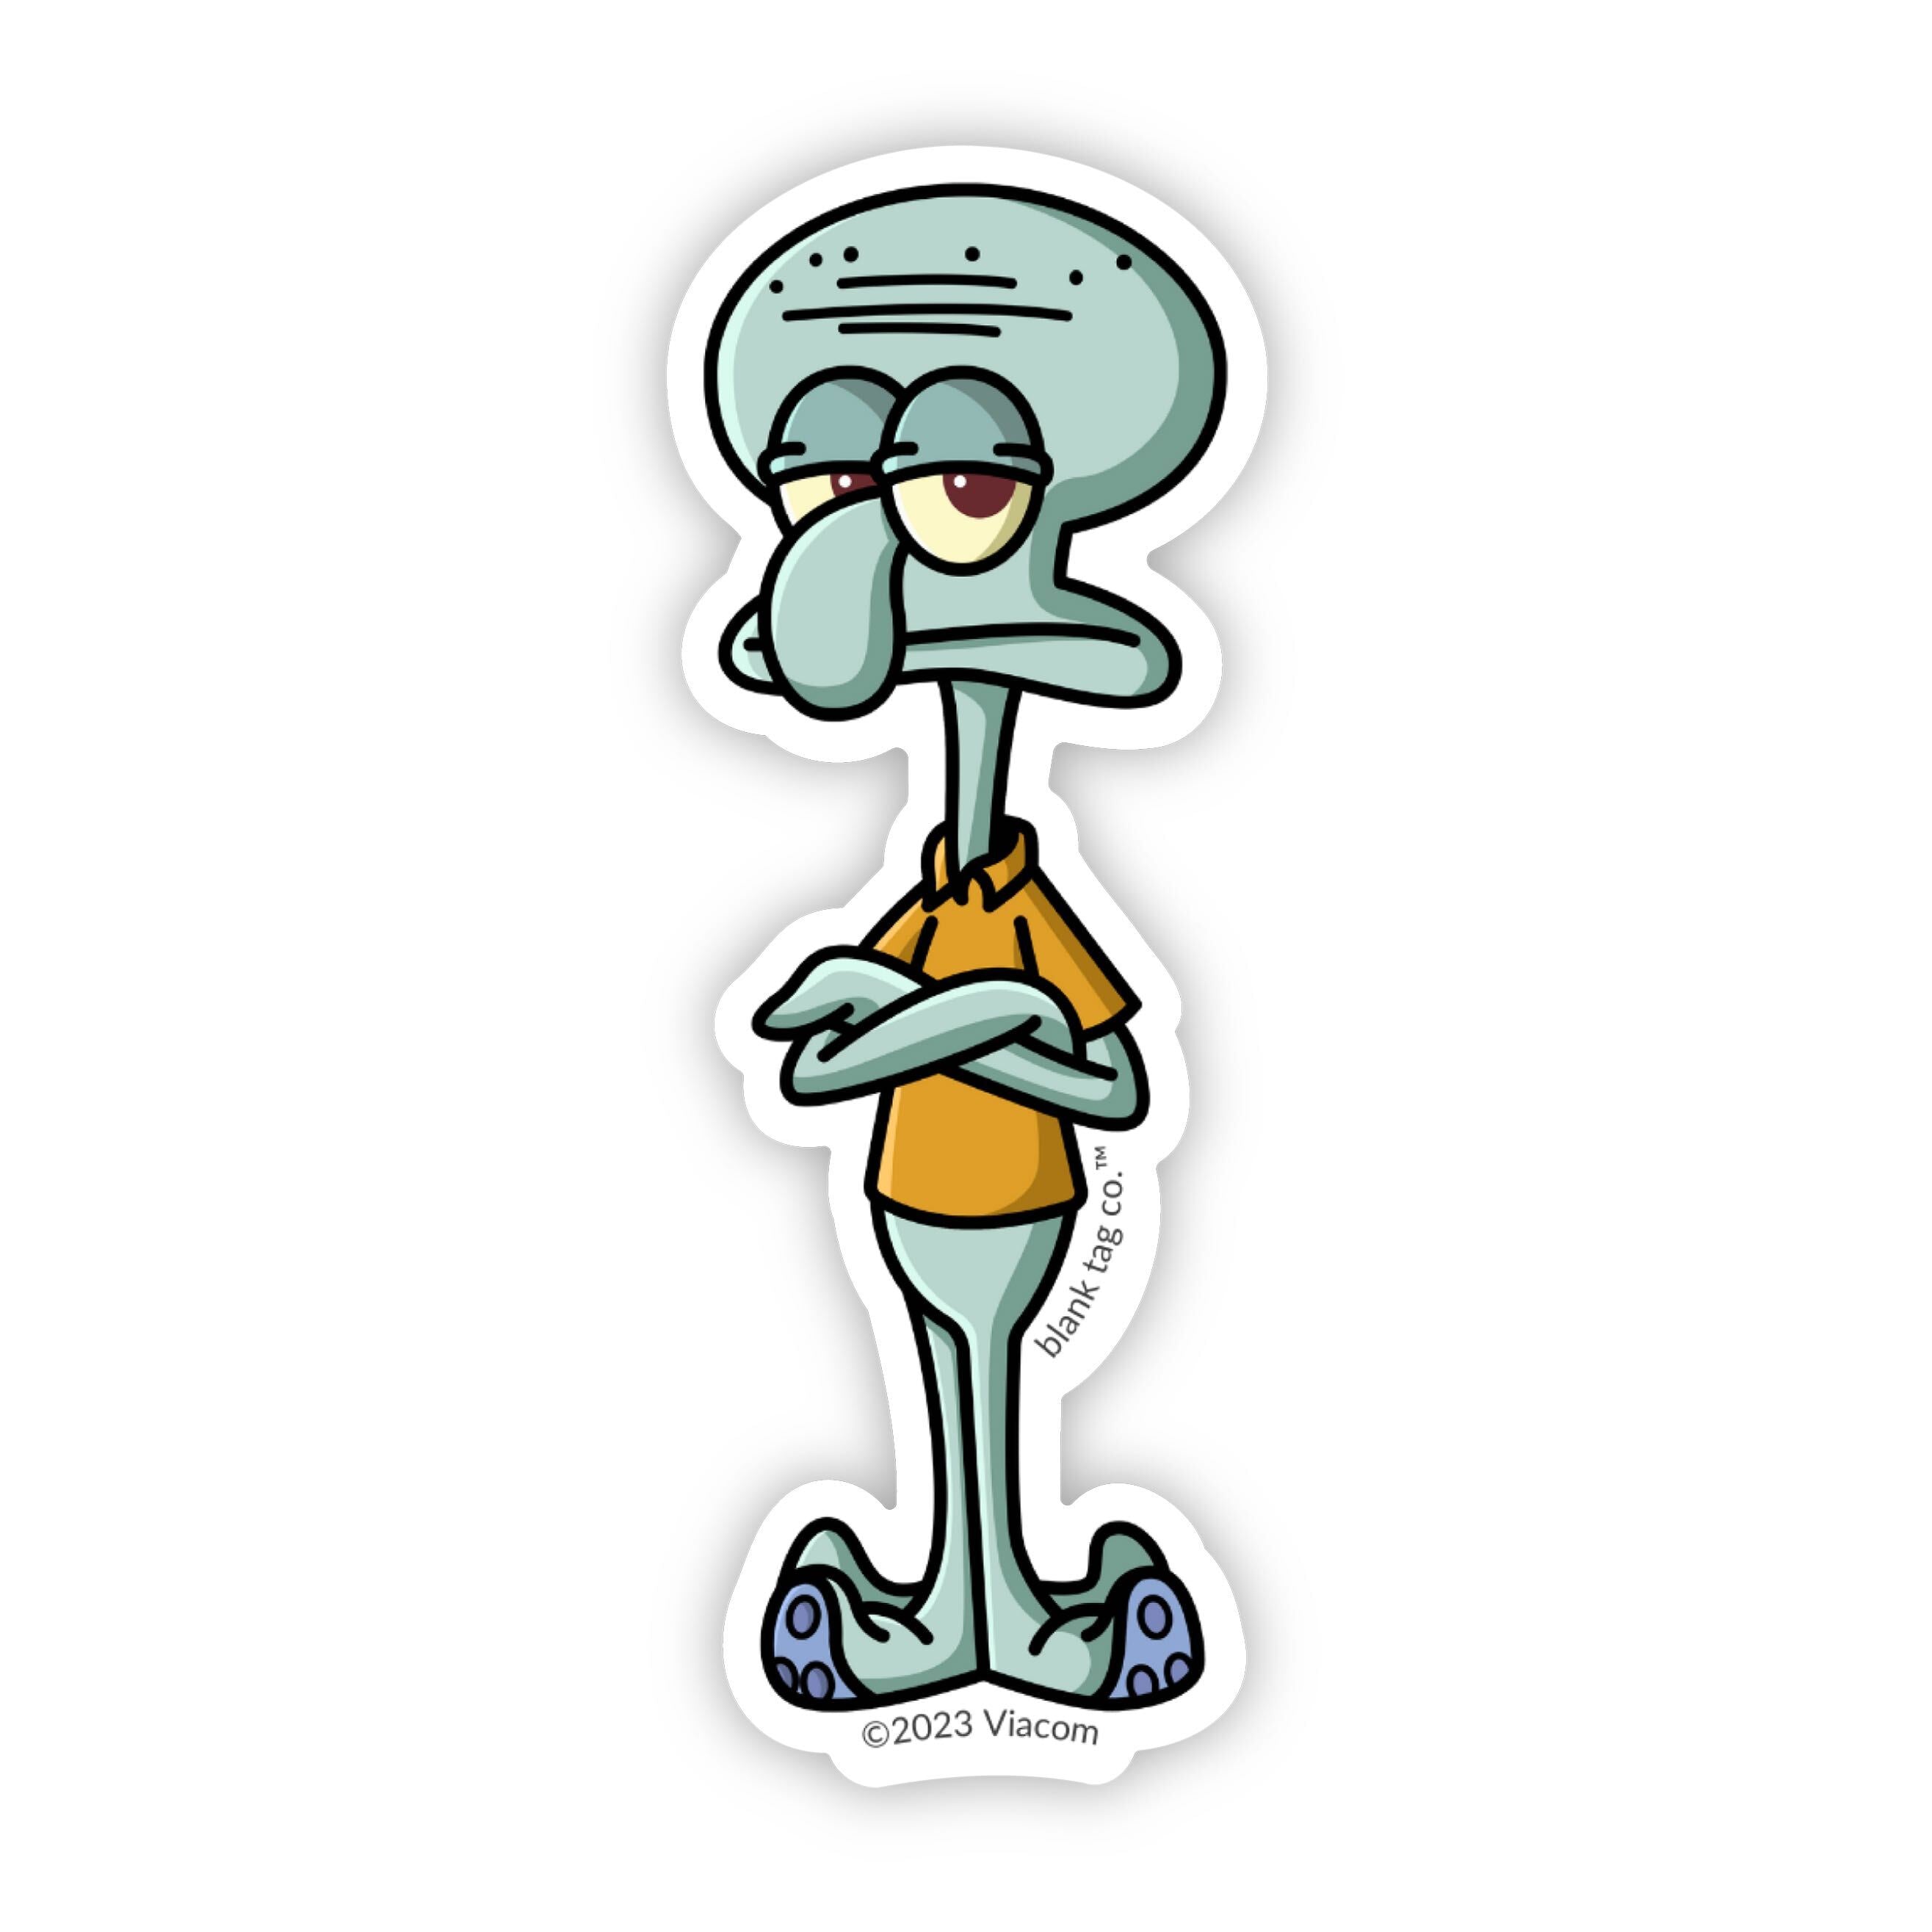 The Squidward Tentacles Sticker